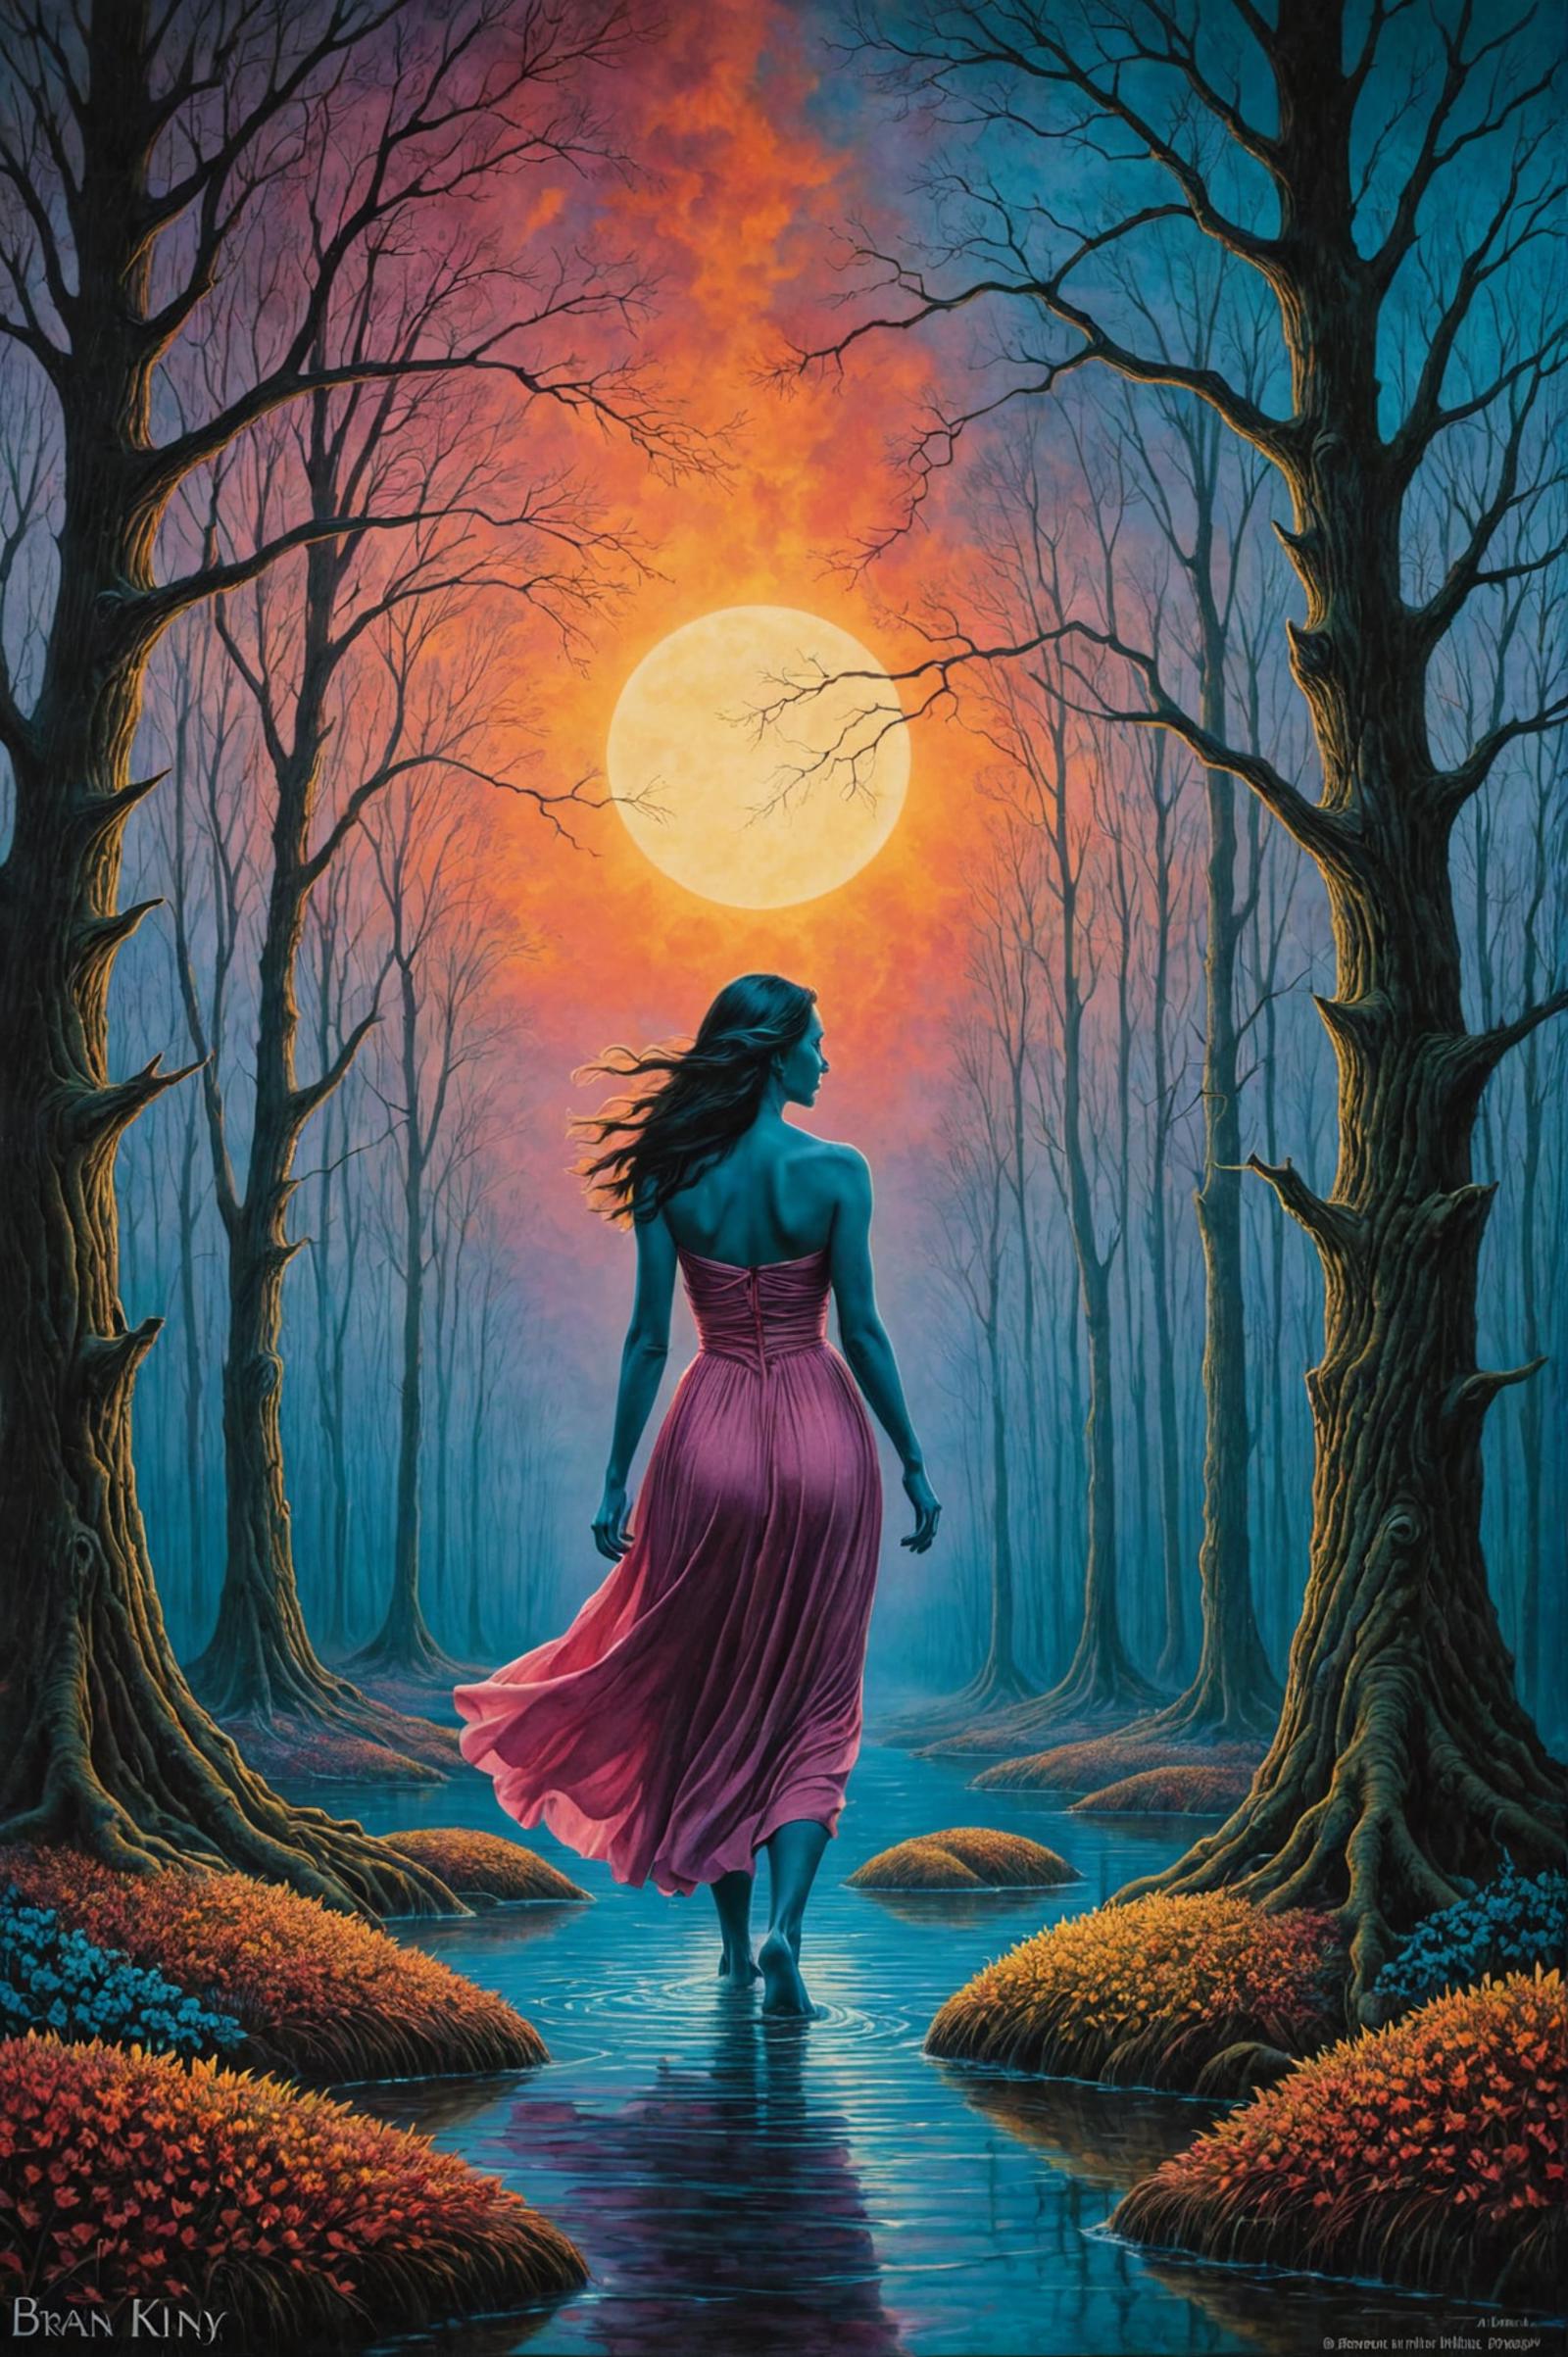 A woman in a pink dress walking through a forest at night.